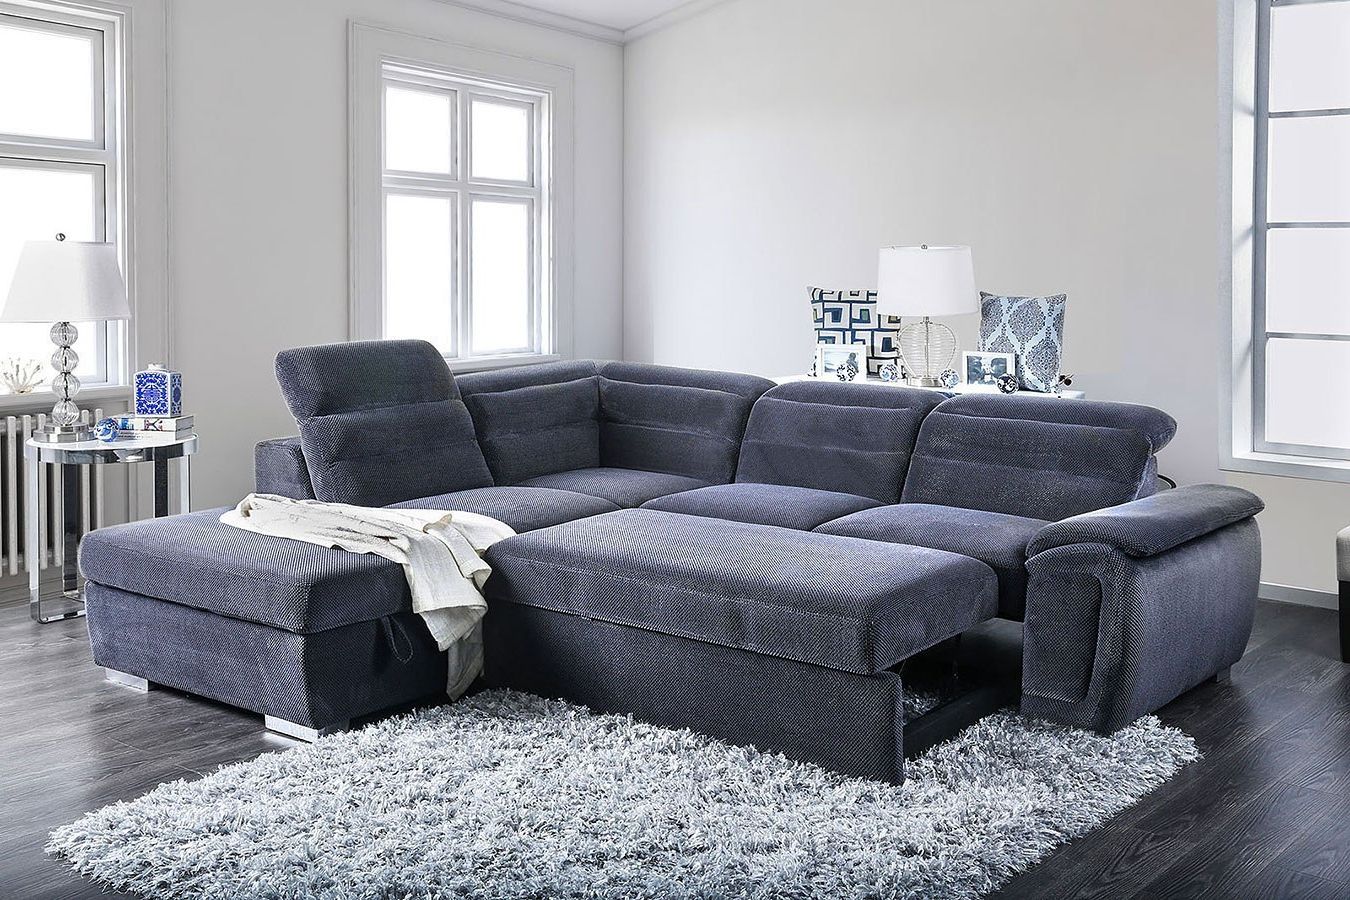 Felicity Sectional W/ Pull Out Sleeper (dark Gray)furniture Of Pertaining To 3 In 1 Gray Pull Out Sleeper Sofas (View 3 of 20)